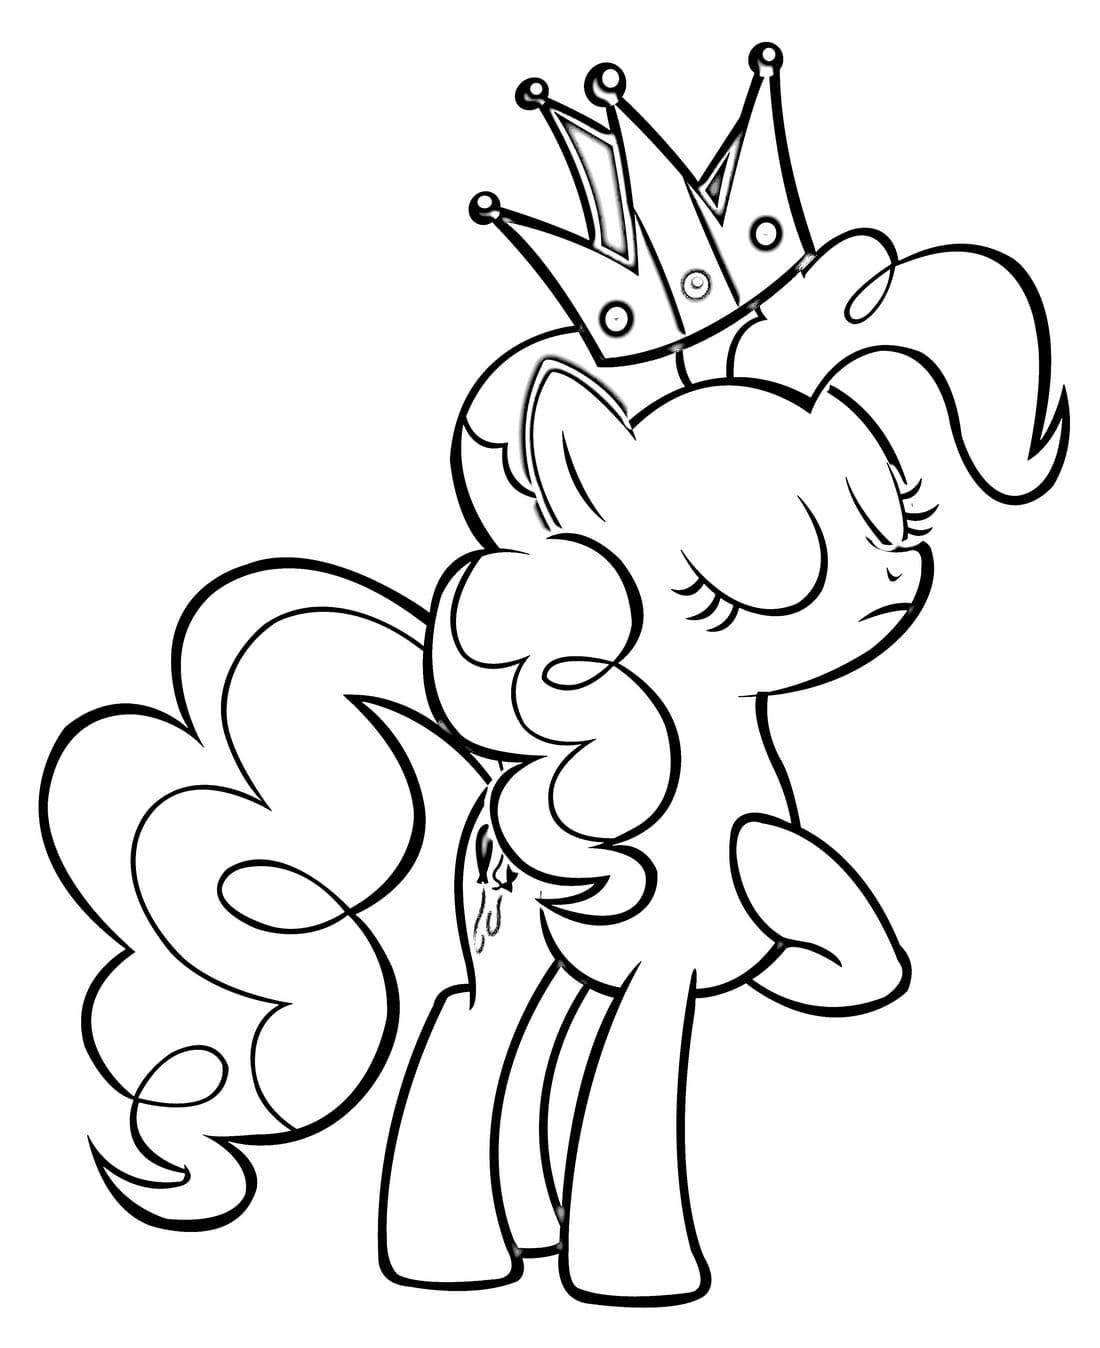 Pinkie Pie Coloring Pages   21 Printable coloring pages